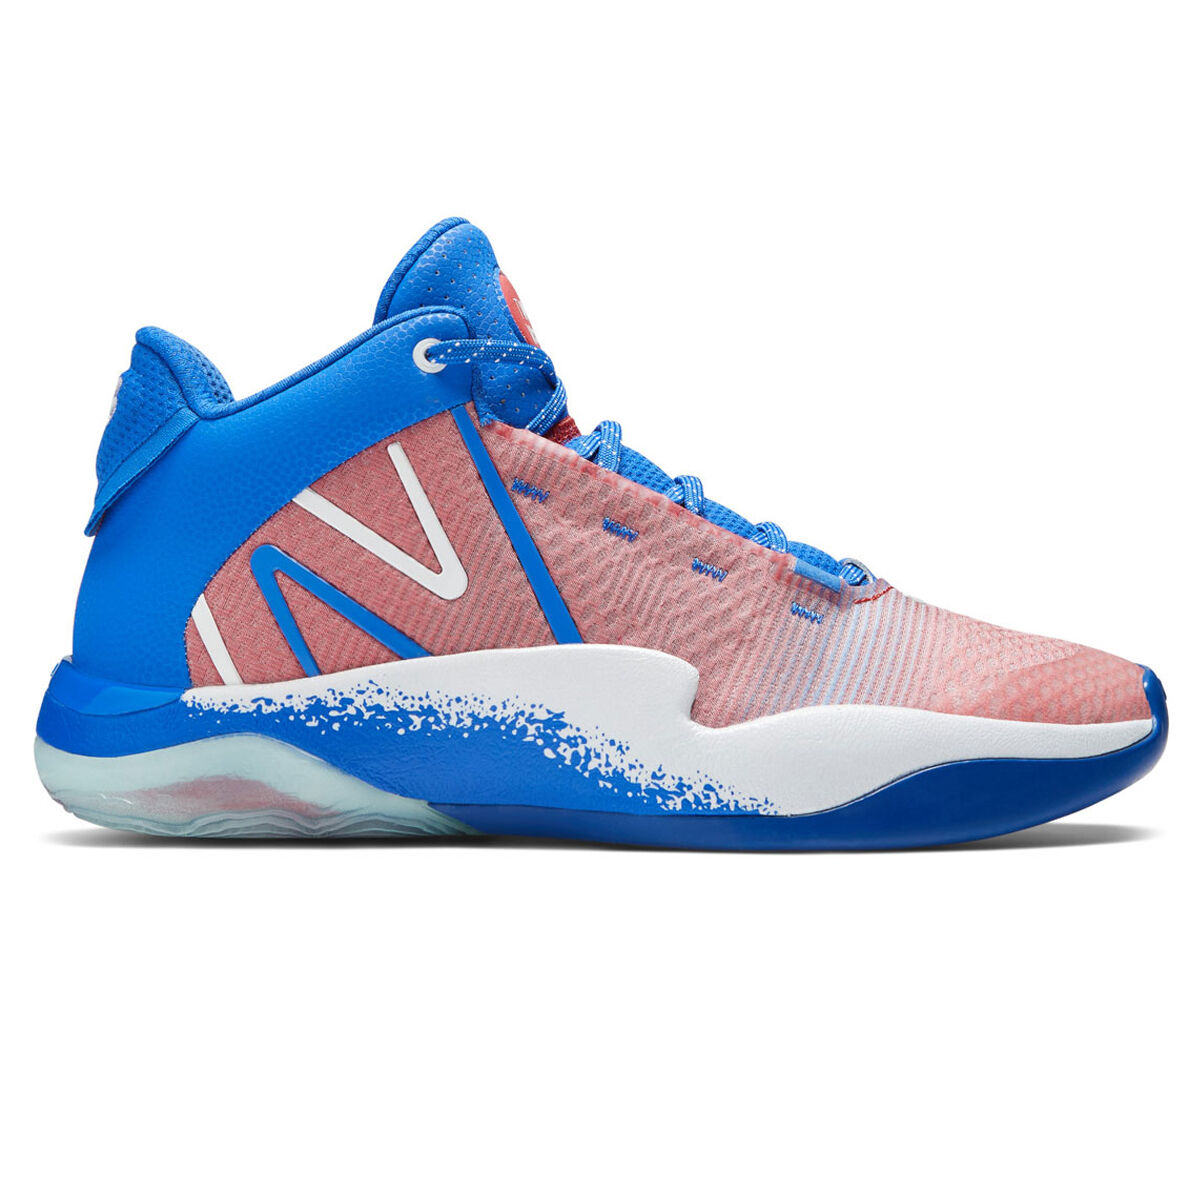 New Balance Two WXY 2 Basketball Shoes | Rebel Sport